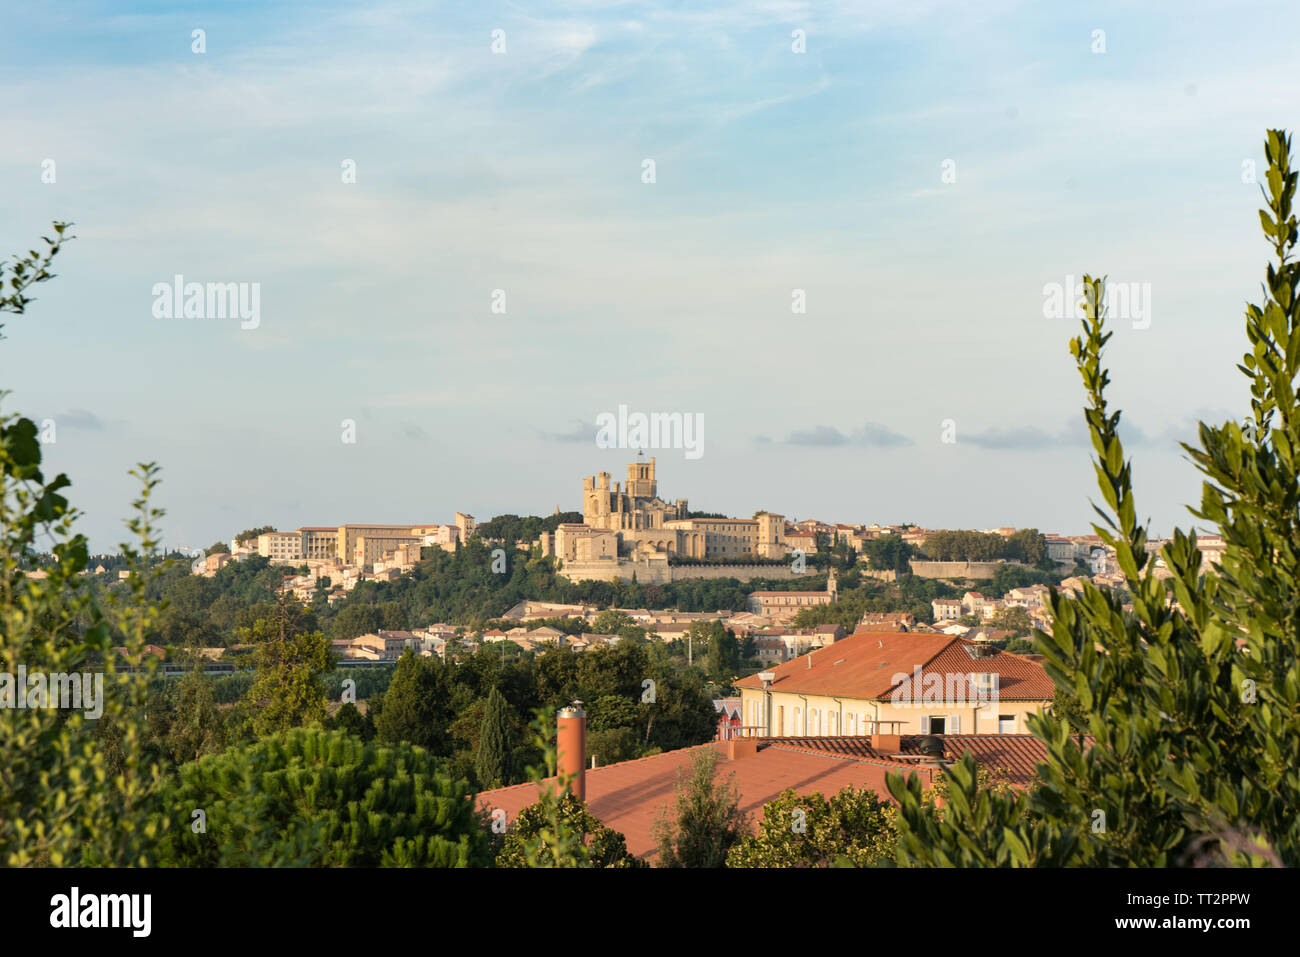 View of  the city of Beziers, in the South of France, from the Neuf Ecluses de Fonserannes (Nine Locks of Fonserannes) a UNESCO World Heritage site on Stock Photo